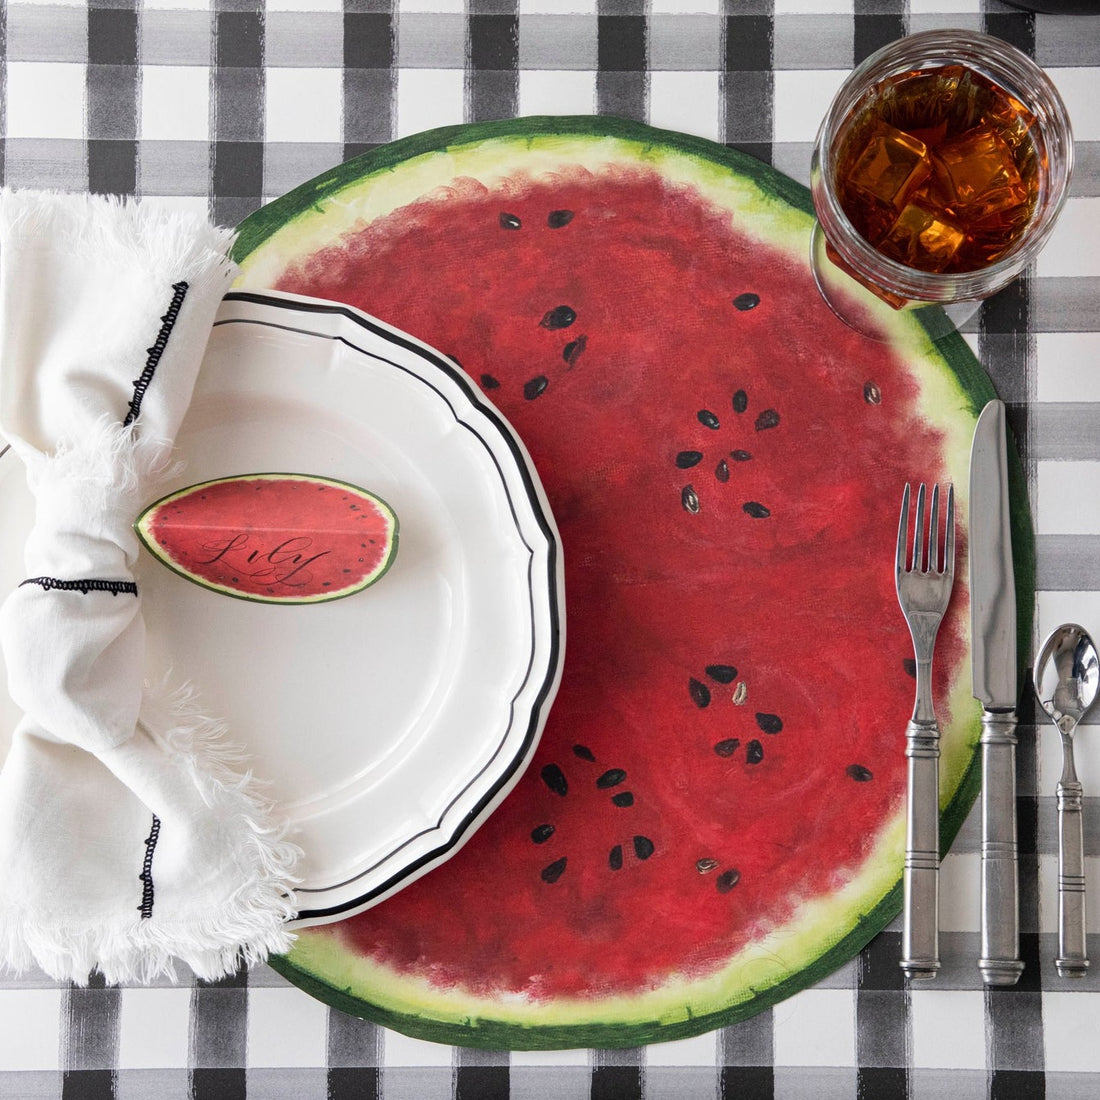 The Die-cut Watermelon Placemat under an elegant place setting, from above.